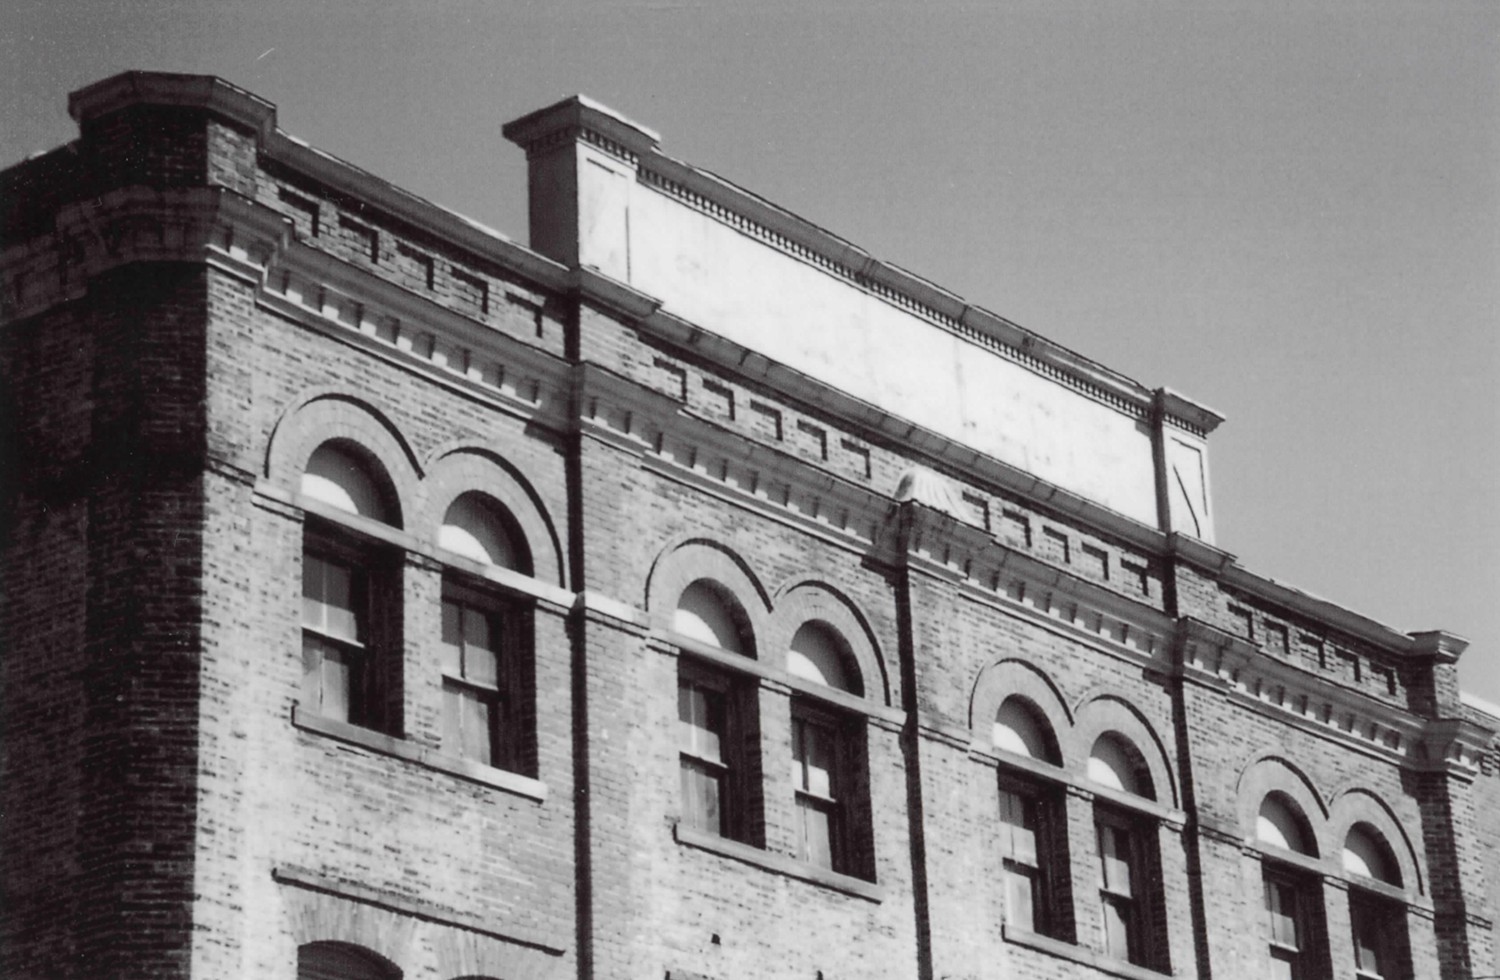 Born Capital Brewery Bottling Works - Hercules Trouser Company, Columbus Ohio Detail of west elevation showing decorative brickwork, cornice, parapet, and raised parapet signboard (2008)